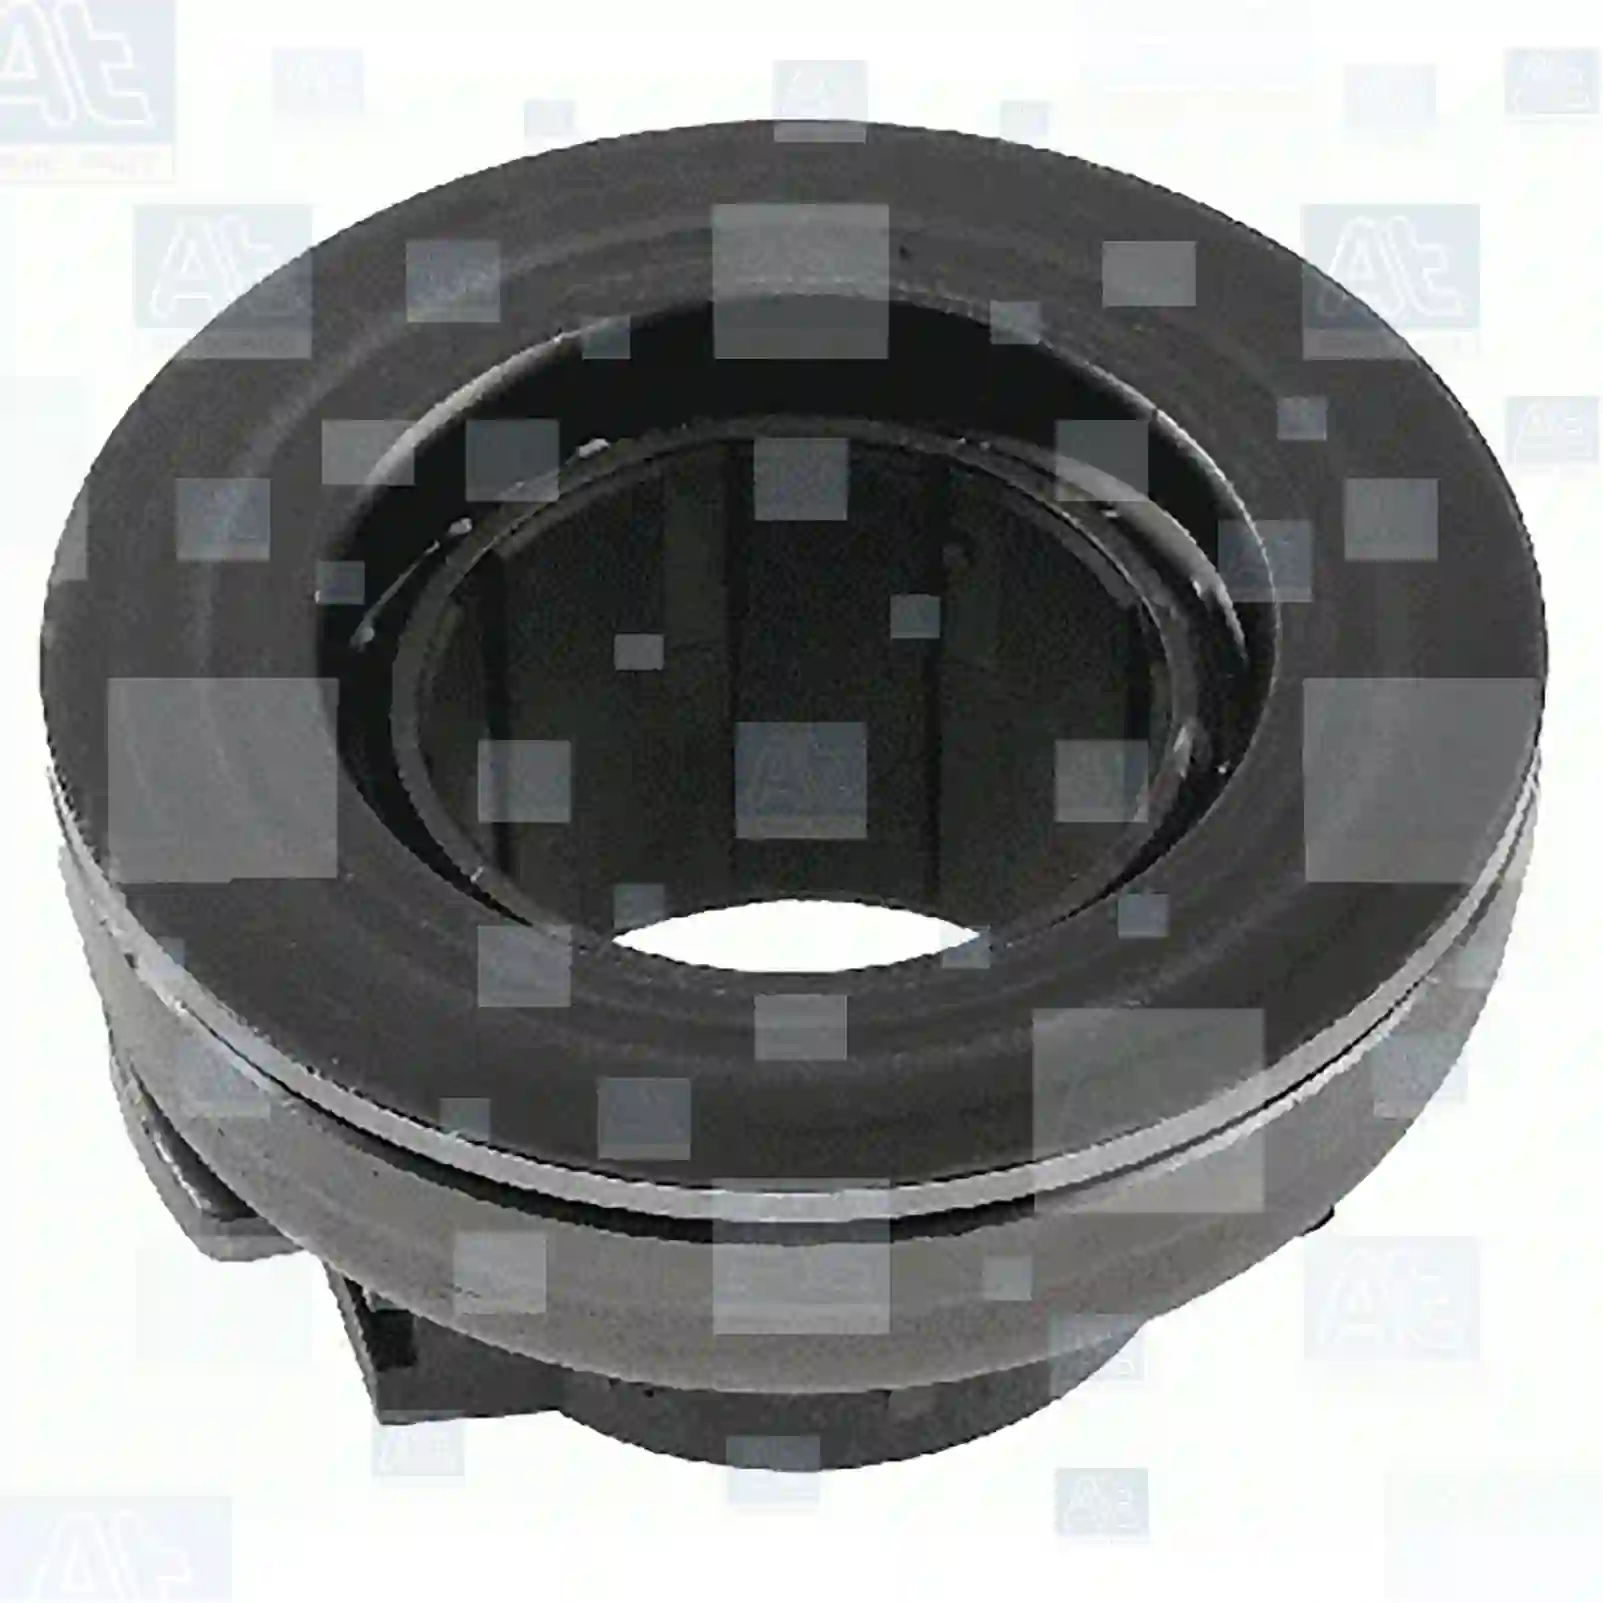 Release bearing, at no 77722214, oem no: 68091008, M408541, 0279810, 0279816, 0514454, 0659320, 1267988, 1310137, 279810, 279816, 514454, 659320, ACHL257, 18060840, 955037, 011116300580-10, 01261539, 01266374, 01266393, 02419028, 02440918, 02475546, 02475547, 02565803, 03345008, 03415039, 03419028, 03423959, 04405963, 06276678, 1111630058010, 121233006301, 1212330062000, 1212330062001, 229991930, 229994750, 33021002, 42003396, 42003397, 42061921, 5145520310, 5148520210, 5157520282, 8739440105, 8739440120, 8739440150, 8739440520, 51485202100, 706178, 06276678, 1111630058010, 1212330062000, 1212330062001, 0890009, 0890330, 0890481, 0894009, 02475546, 02475547, 02565803, 42003396, 42003397, 42061921, 352193, 706178, X860536908706, X860546908709, 81305507000, 01266374, 01266393, 02419028, 02440918, 02475546, 02475547, 02565803, 03345008, 03415039, 03419028, 03423959, 33021002, 42003396, 42003397, 42061921, 5145520310, 5148520210, 5157520282, 86021267, 86021325, 86021326, 8739440120, 8739440520, 8739440710, 60080256, 01261539, 04405963, 8739440105, 8739440120, 332120135, 5001041, 81305500009, 81305500032, 81305500044, 81305500060, 81305507000, 040117427, 2051614, 5000058221, 5000240864, 5000270101, 5000613650, 5000677075, 5000809155, 5001866623, 5001866625, 5516021267, 000793020, 029231123, 02923750310, 02923750320, 02923750330, 02926532010, 02926532020, 029265590, 02926559010, 203995131, 215290470, 229991370, 229991930, 5601009, 632100700, 685611, 6856112, ZG30340-0008 At Spare Part | Engine, Accelerator Pedal, Camshaft, Connecting Rod, Crankcase, Crankshaft, Cylinder Head, Engine Suspension Mountings, Exhaust Manifold, Exhaust Gas Recirculation, Filter Kits, Flywheel Housing, General Overhaul Kits, Engine, Intake Manifold, Oil Cleaner, Oil Cooler, Oil Filter, Oil Pump, Oil Sump, Piston & Liner, Sensor & Switch, Timing Case, Turbocharger, Cooling System, Belt Tensioner, Coolant Filter, Coolant Pipe, Corrosion Prevention Agent, Drive, Expansion Tank, Fan, Intercooler, Monitors & Gauges, Radiator, Thermostat, V-Belt / Timing belt, Water Pump, Fuel System, Electronical Injector Unit, Feed Pump, Fuel Filter, cpl., Fuel Gauge Sender,  Fuel Line, Fuel Pump, Fuel Tank, Injection Line Kit, Injection Pump, Exhaust System, Clutch & Pedal, Gearbox, Propeller Shaft, Axles, Brake System, Hubs & Wheels, Suspension, Leaf Spring, Universal Parts / Accessories, Steering, Electrical System, Cabin Release bearing, at no 77722214, oem no: 68091008, M408541, 0279810, 0279816, 0514454, 0659320, 1267988, 1310137, 279810, 279816, 514454, 659320, ACHL257, 18060840, 955037, 011116300580-10, 01261539, 01266374, 01266393, 02419028, 02440918, 02475546, 02475547, 02565803, 03345008, 03415039, 03419028, 03423959, 04405963, 06276678, 1111630058010, 121233006301, 1212330062000, 1212330062001, 229991930, 229994750, 33021002, 42003396, 42003397, 42061921, 5145520310, 5148520210, 5157520282, 8739440105, 8739440120, 8739440150, 8739440520, 51485202100, 706178, 06276678, 1111630058010, 1212330062000, 1212330062001, 0890009, 0890330, 0890481, 0894009, 02475546, 02475547, 02565803, 42003396, 42003397, 42061921, 352193, 706178, X860536908706, X860546908709, 81305507000, 01266374, 01266393, 02419028, 02440918, 02475546, 02475547, 02565803, 03345008, 03415039, 03419028, 03423959, 33021002, 42003396, 42003397, 42061921, 5145520310, 5148520210, 5157520282, 86021267, 86021325, 86021326, 8739440120, 8739440520, 8739440710, 60080256, 01261539, 04405963, 8739440105, 8739440120, 332120135, 5001041, 81305500009, 81305500032, 81305500044, 81305500060, 81305507000, 040117427, 2051614, 5000058221, 5000240864, 5000270101, 5000613650, 5000677075, 5000809155, 5001866623, 5001866625, 5516021267, 000793020, 029231123, 02923750310, 02923750320, 02923750330, 02926532010, 02926532020, 029265590, 02926559010, 203995131, 215290470, 229991370, 229991930, 5601009, 632100700, 685611, 6856112, ZG30340-0008 At Spare Part | Engine, Accelerator Pedal, Camshaft, Connecting Rod, Crankcase, Crankshaft, Cylinder Head, Engine Suspension Mountings, Exhaust Manifold, Exhaust Gas Recirculation, Filter Kits, Flywheel Housing, General Overhaul Kits, Engine, Intake Manifold, Oil Cleaner, Oil Cooler, Oil Filter, Oil Pump, Oil Sump, Piston & Liner, Sensor & Switch, Timing Case, Turbocharger, Cooling System, Belt Tensioner, Coolant Filter, Coolant Pipe, Corrosion Prevention Agent, Drive, Expansion Tank, Fan, Intercooler, Monitors & Gauges, Radiator, Thermostat, V-Belt / Timing belt, Water Pump, Fuel System, Electronical Injector Unit, Feed Pump, Fuel Filter, cpl., Fuel Gauge Sender,  Fuel Line, Fuel Pump, Fuel Tank, Injection Line Kit, Injection Pump, Exhaust System, Clutch & Pedal, Gearbox, Propeller Shaft, Axles, Brake System, Hubs & Wheels, Suspension, Leaf Spring, Universal Parts / Accessories, Steering, Electrical System, Cabin